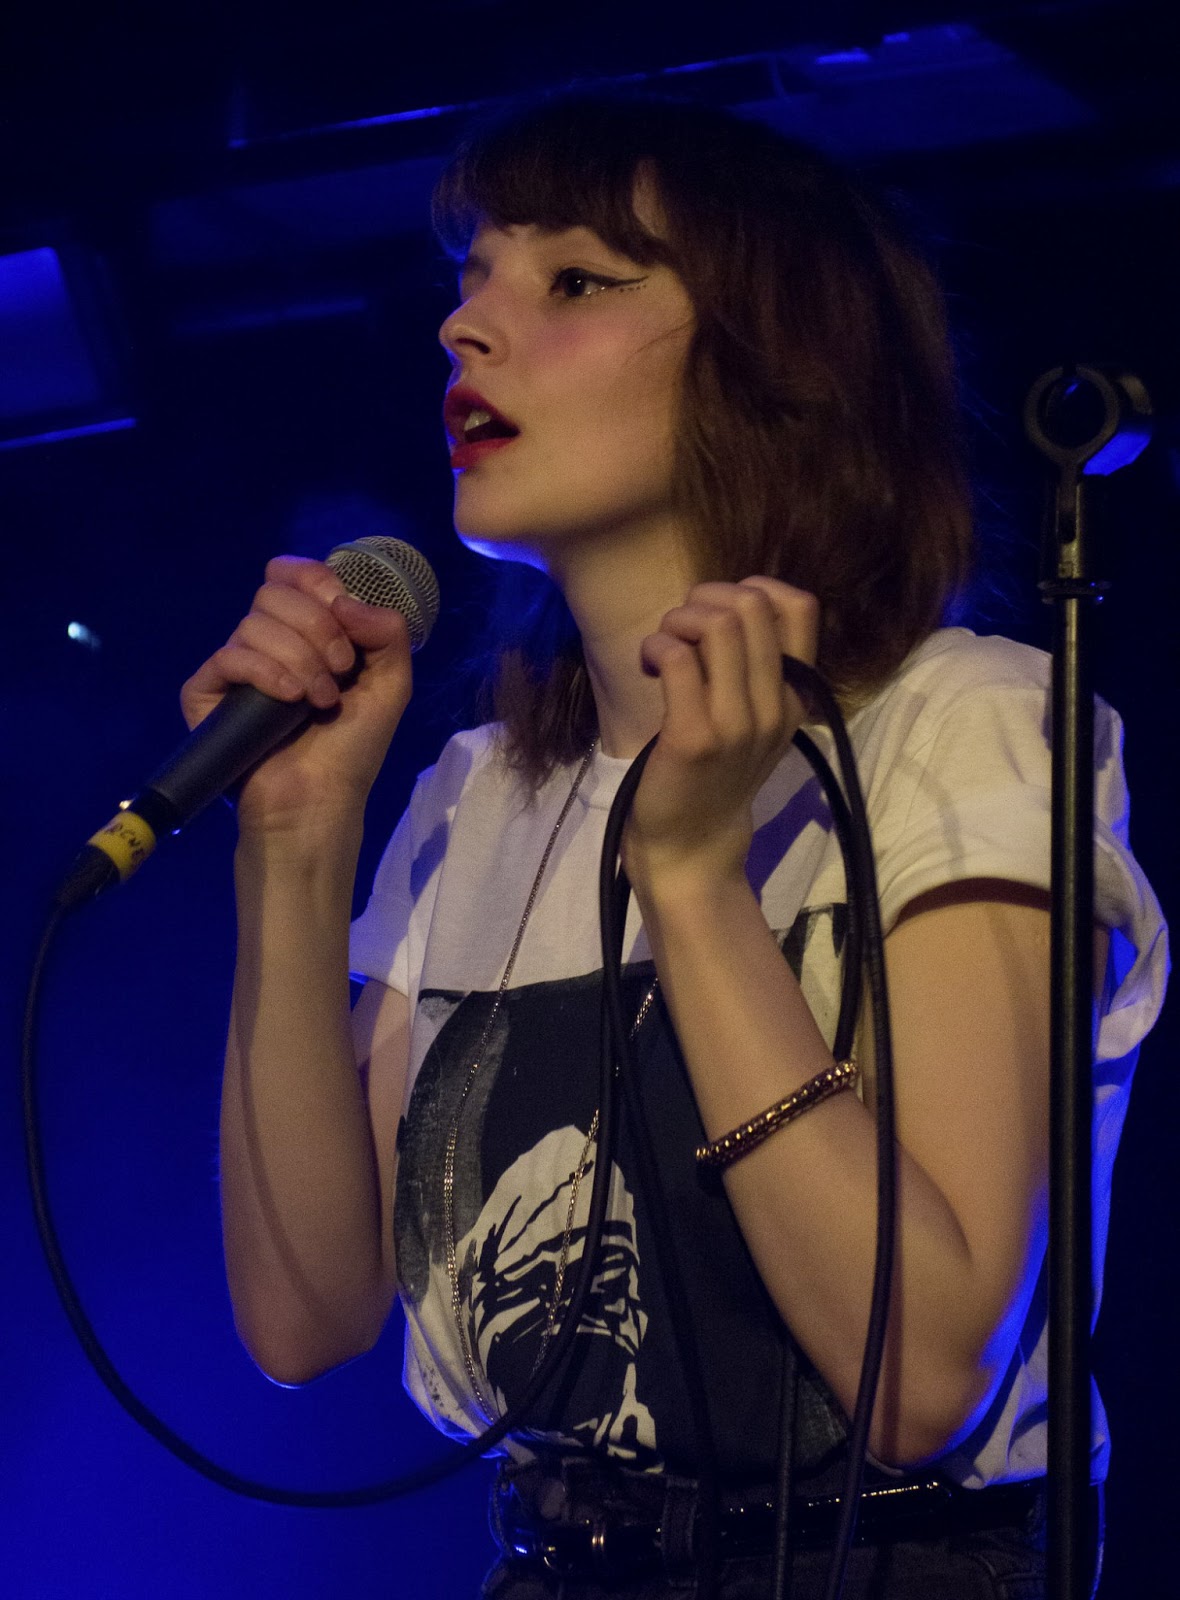 Jeremy's Indie Music: Chvrches, Manchester Sound Control, 2nd May 2013 4/10